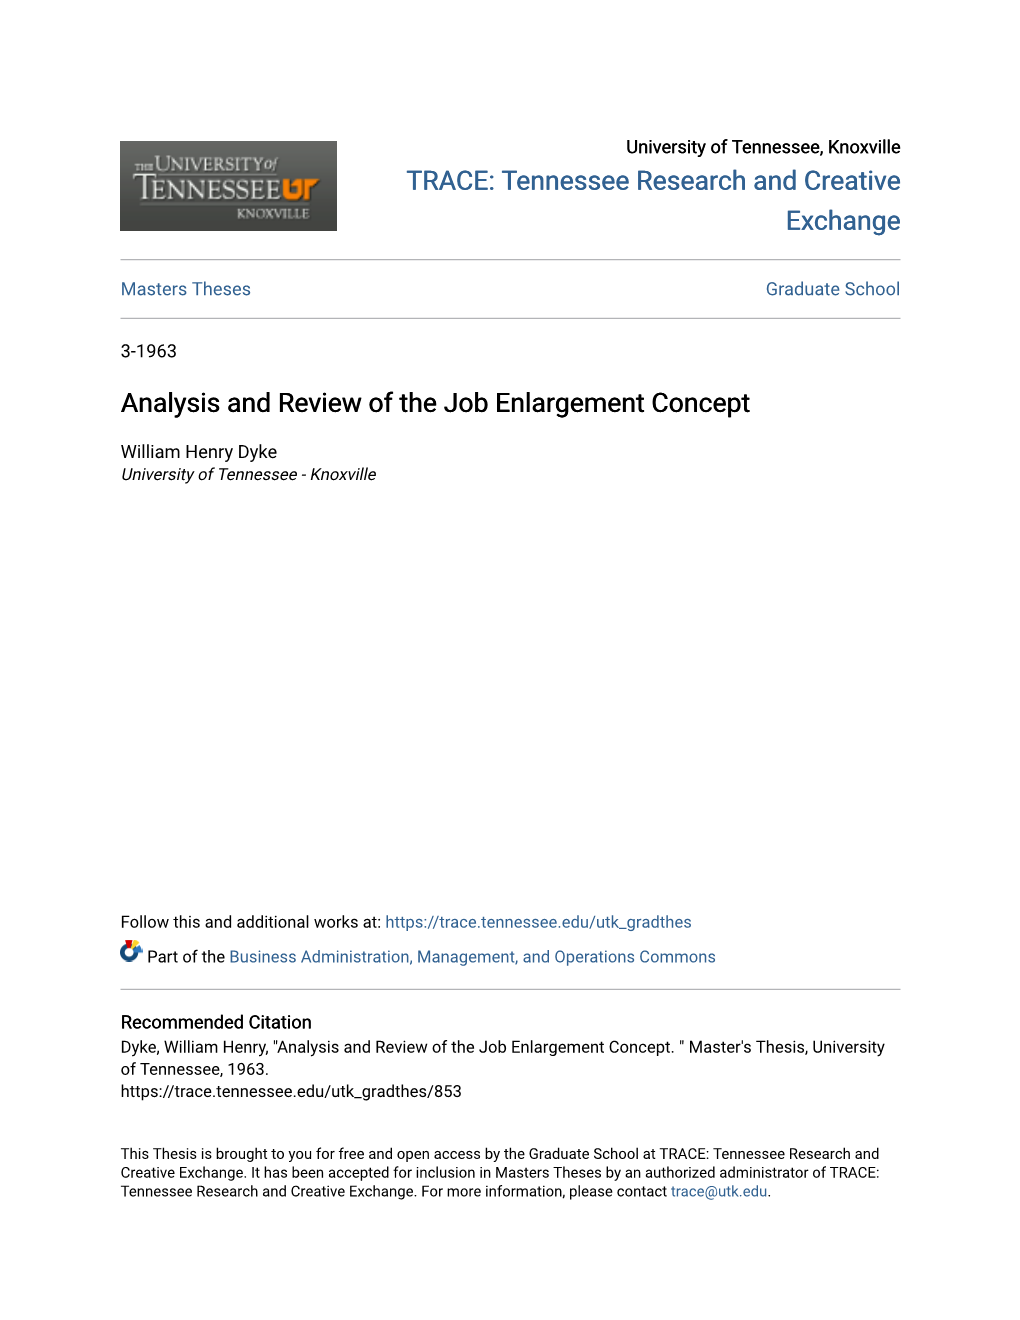 Analysis and Review of the Job Enlargement Concept